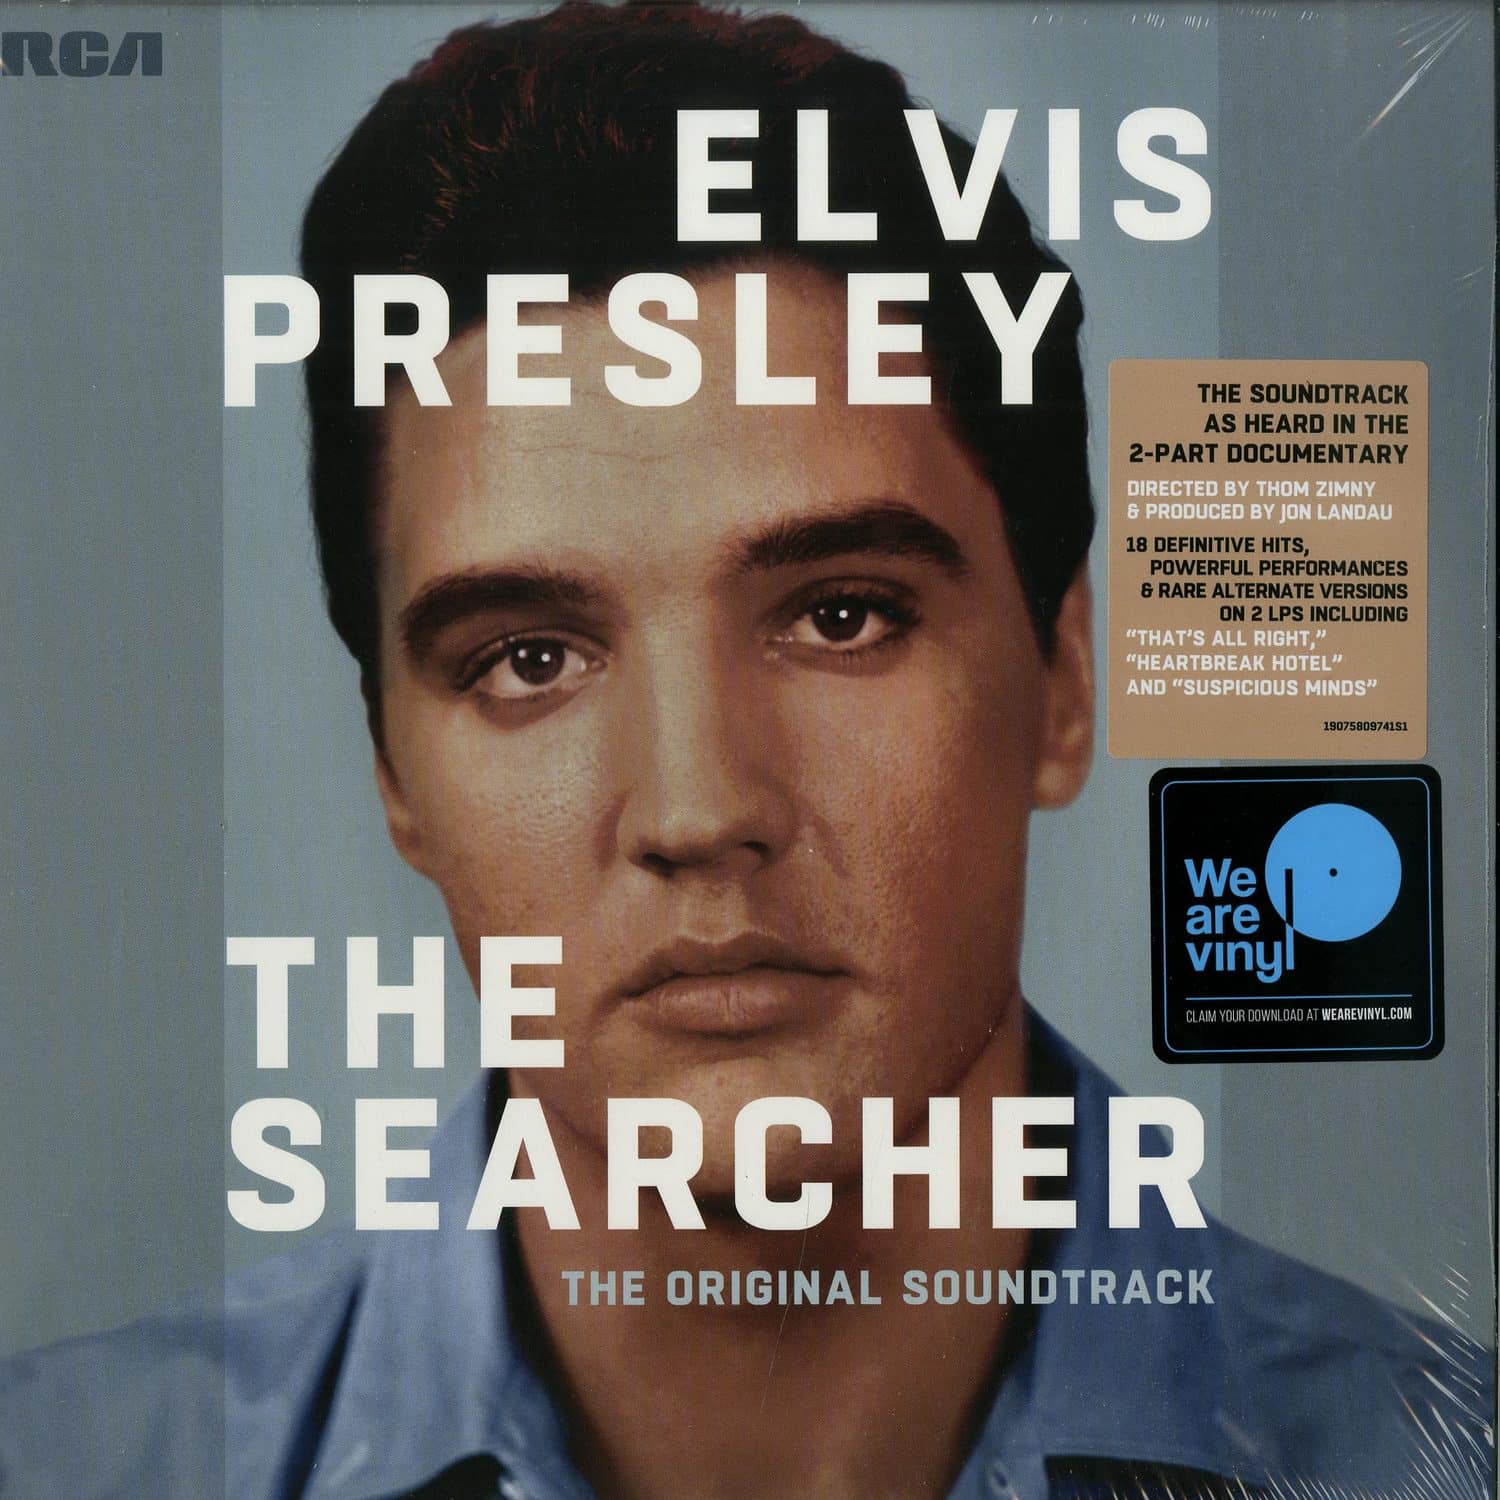 Elvis Presley - THE SEARCHER O.S.T. 